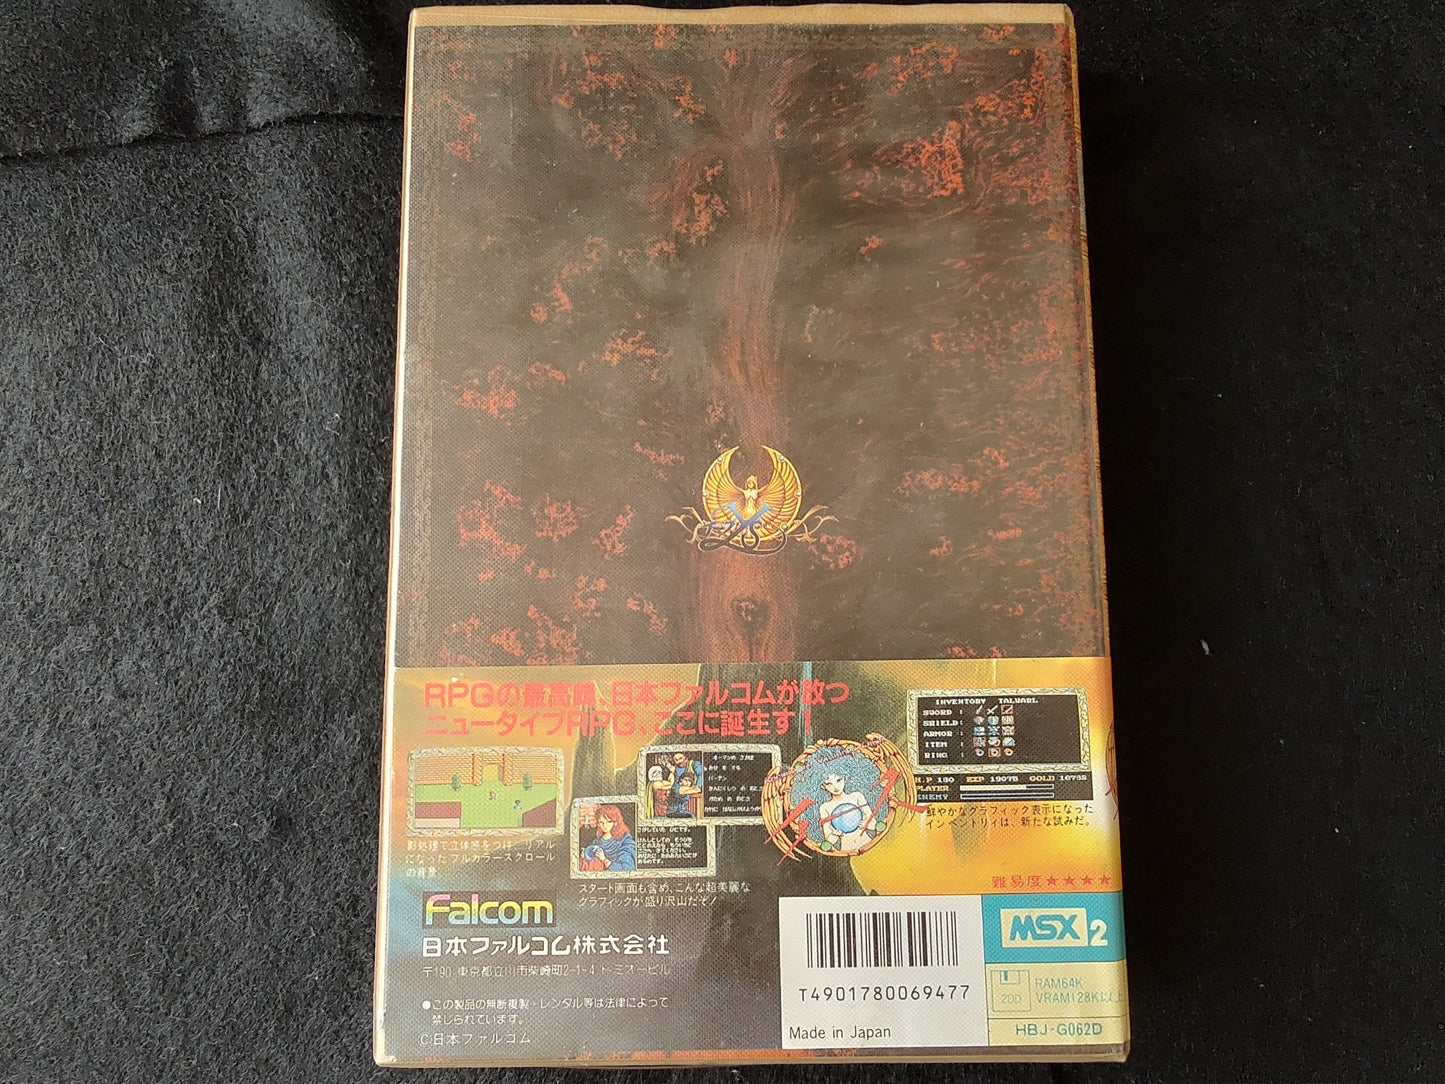 Ys - Ancient Ys Vanished - MSX MSX2 Game Disk,Manual, Boxed tested-f1022-